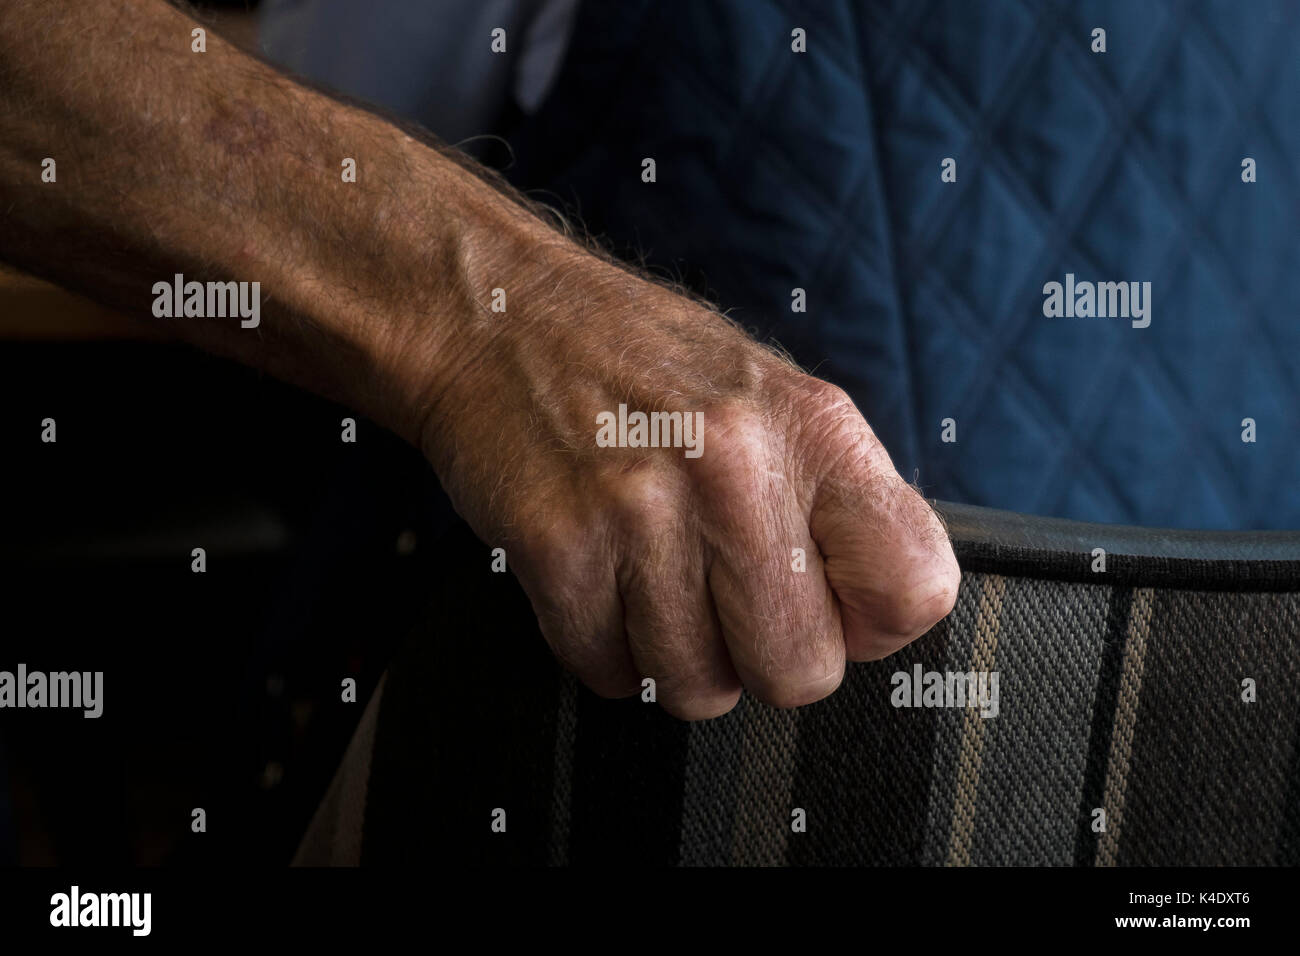 Age - A closeup view of the hand of an elderly person tightly gripping the back of a chair. Stock Photo